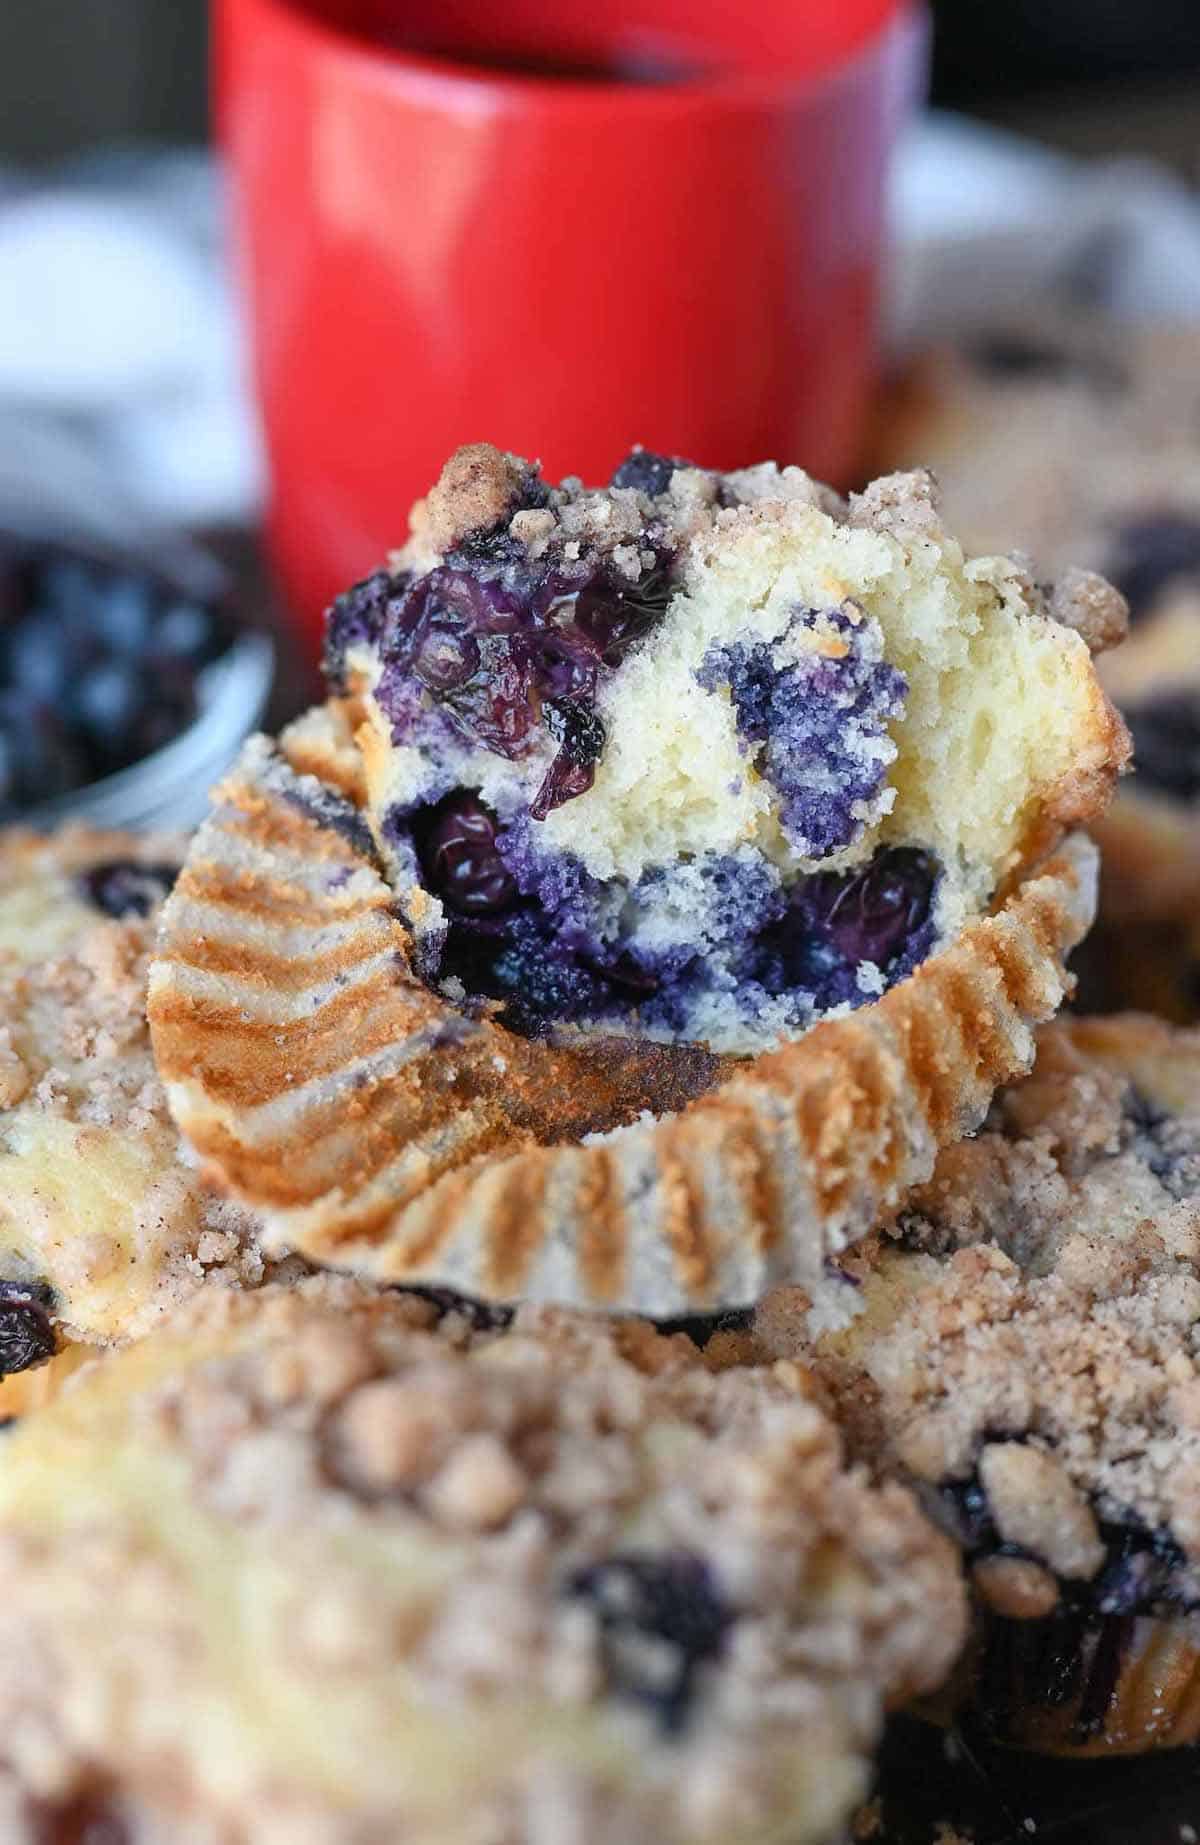 A bite out of a blueberry muffin.